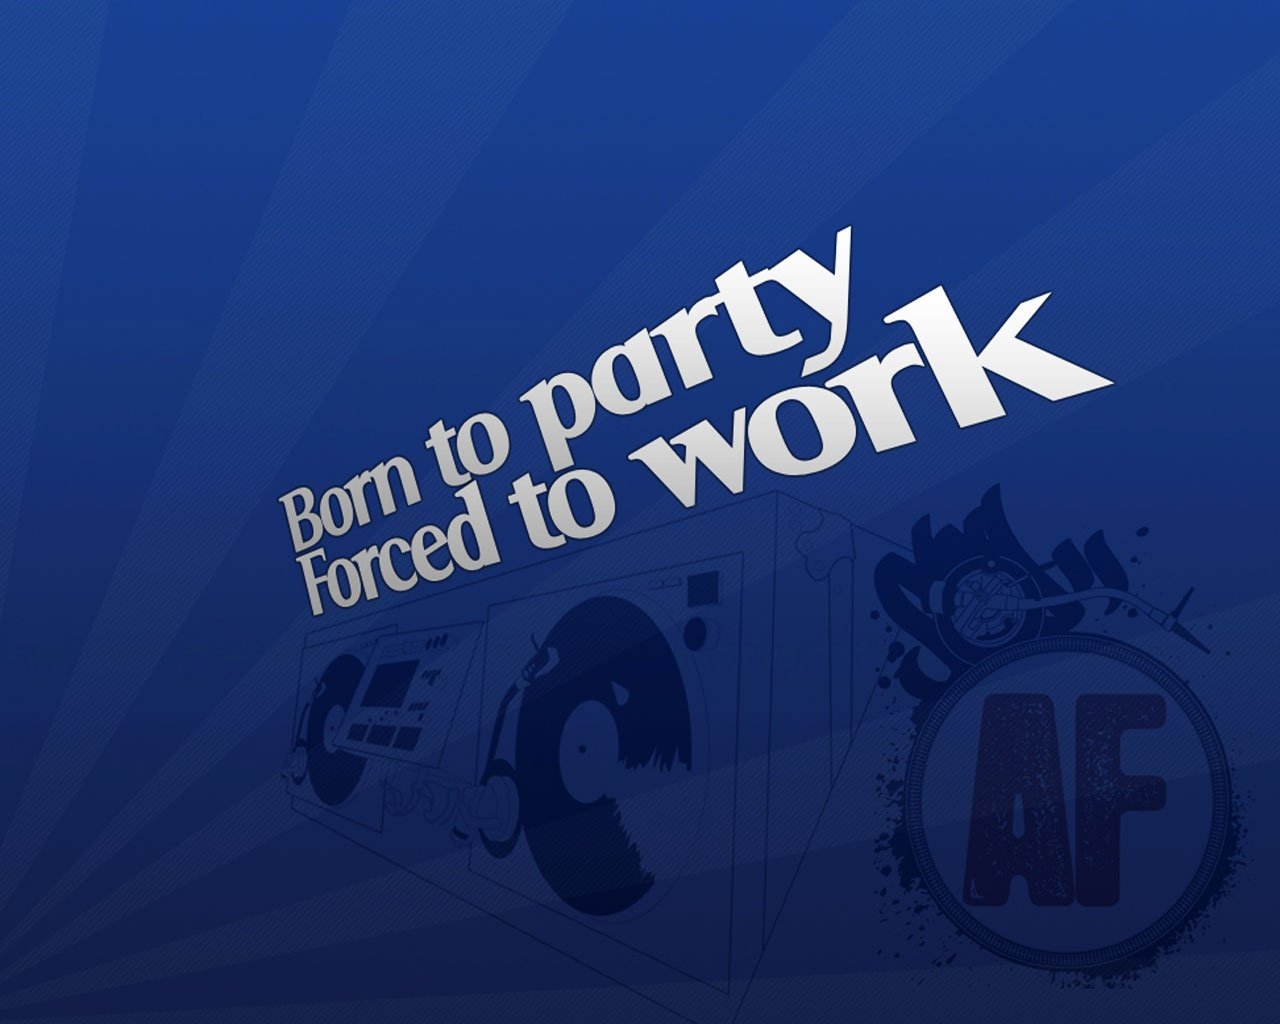  Born To Party Forced To Work wallpaper music and dance wallpapers